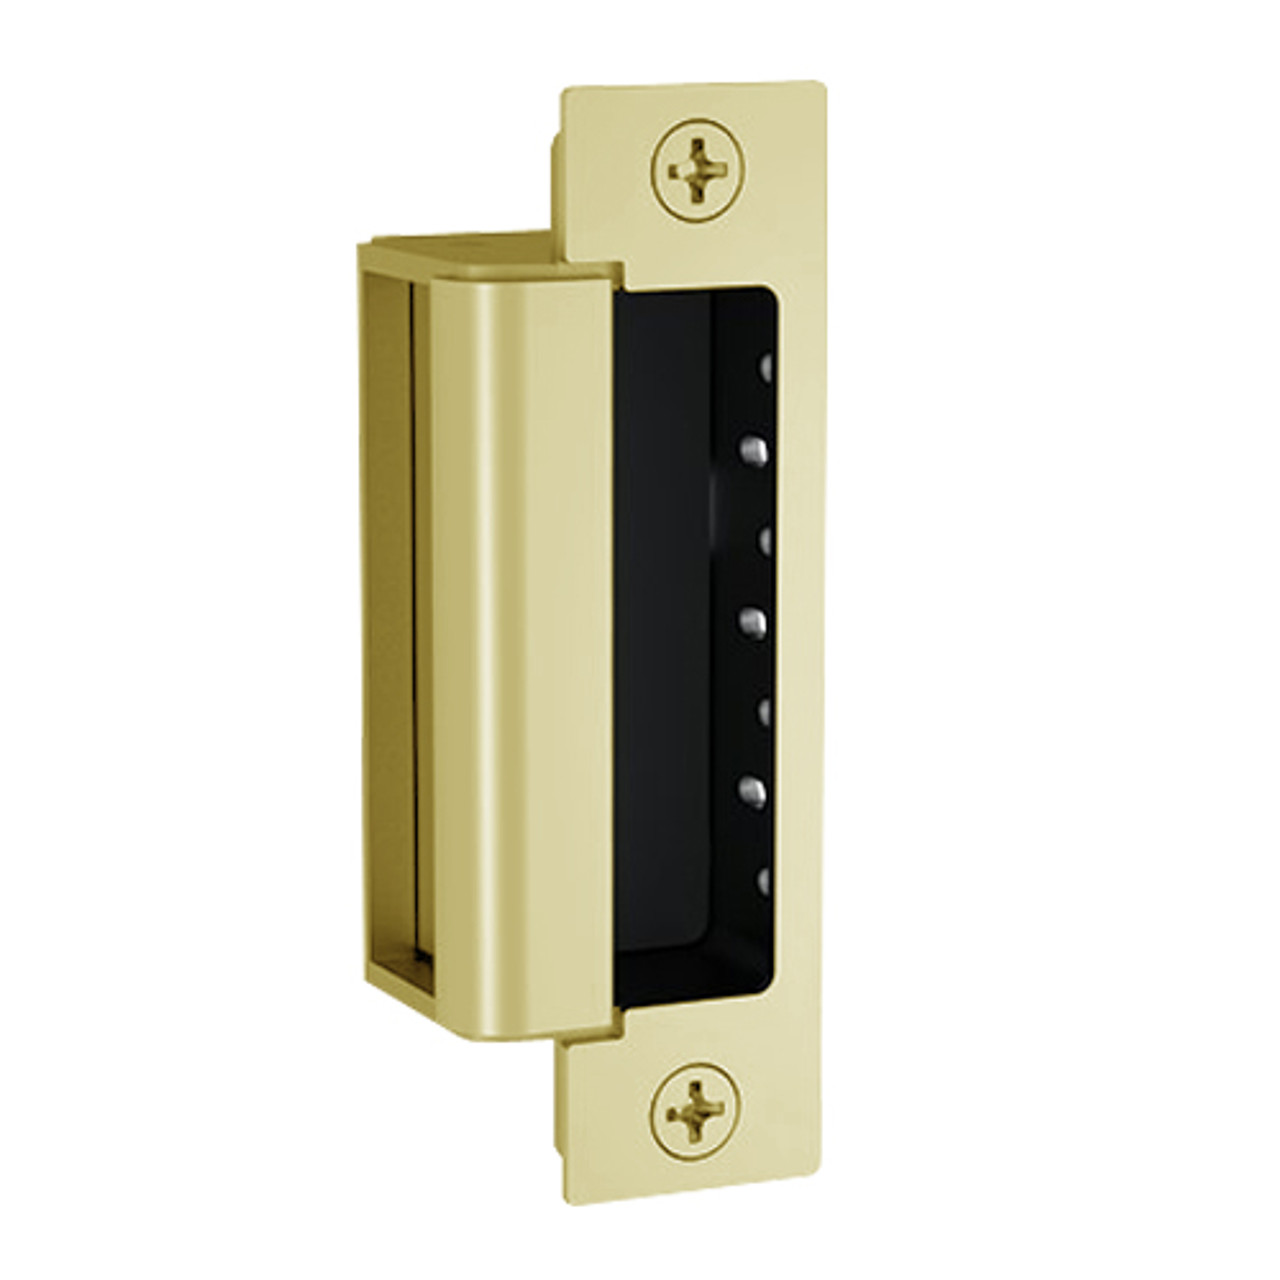 1600-CLB-DLMS-606 Hes 1600 Series Dynamic Low Profile Electric Strike for Latchbolt Lock with Dual Lock Monitor & Strike Monitor in Satin Brass